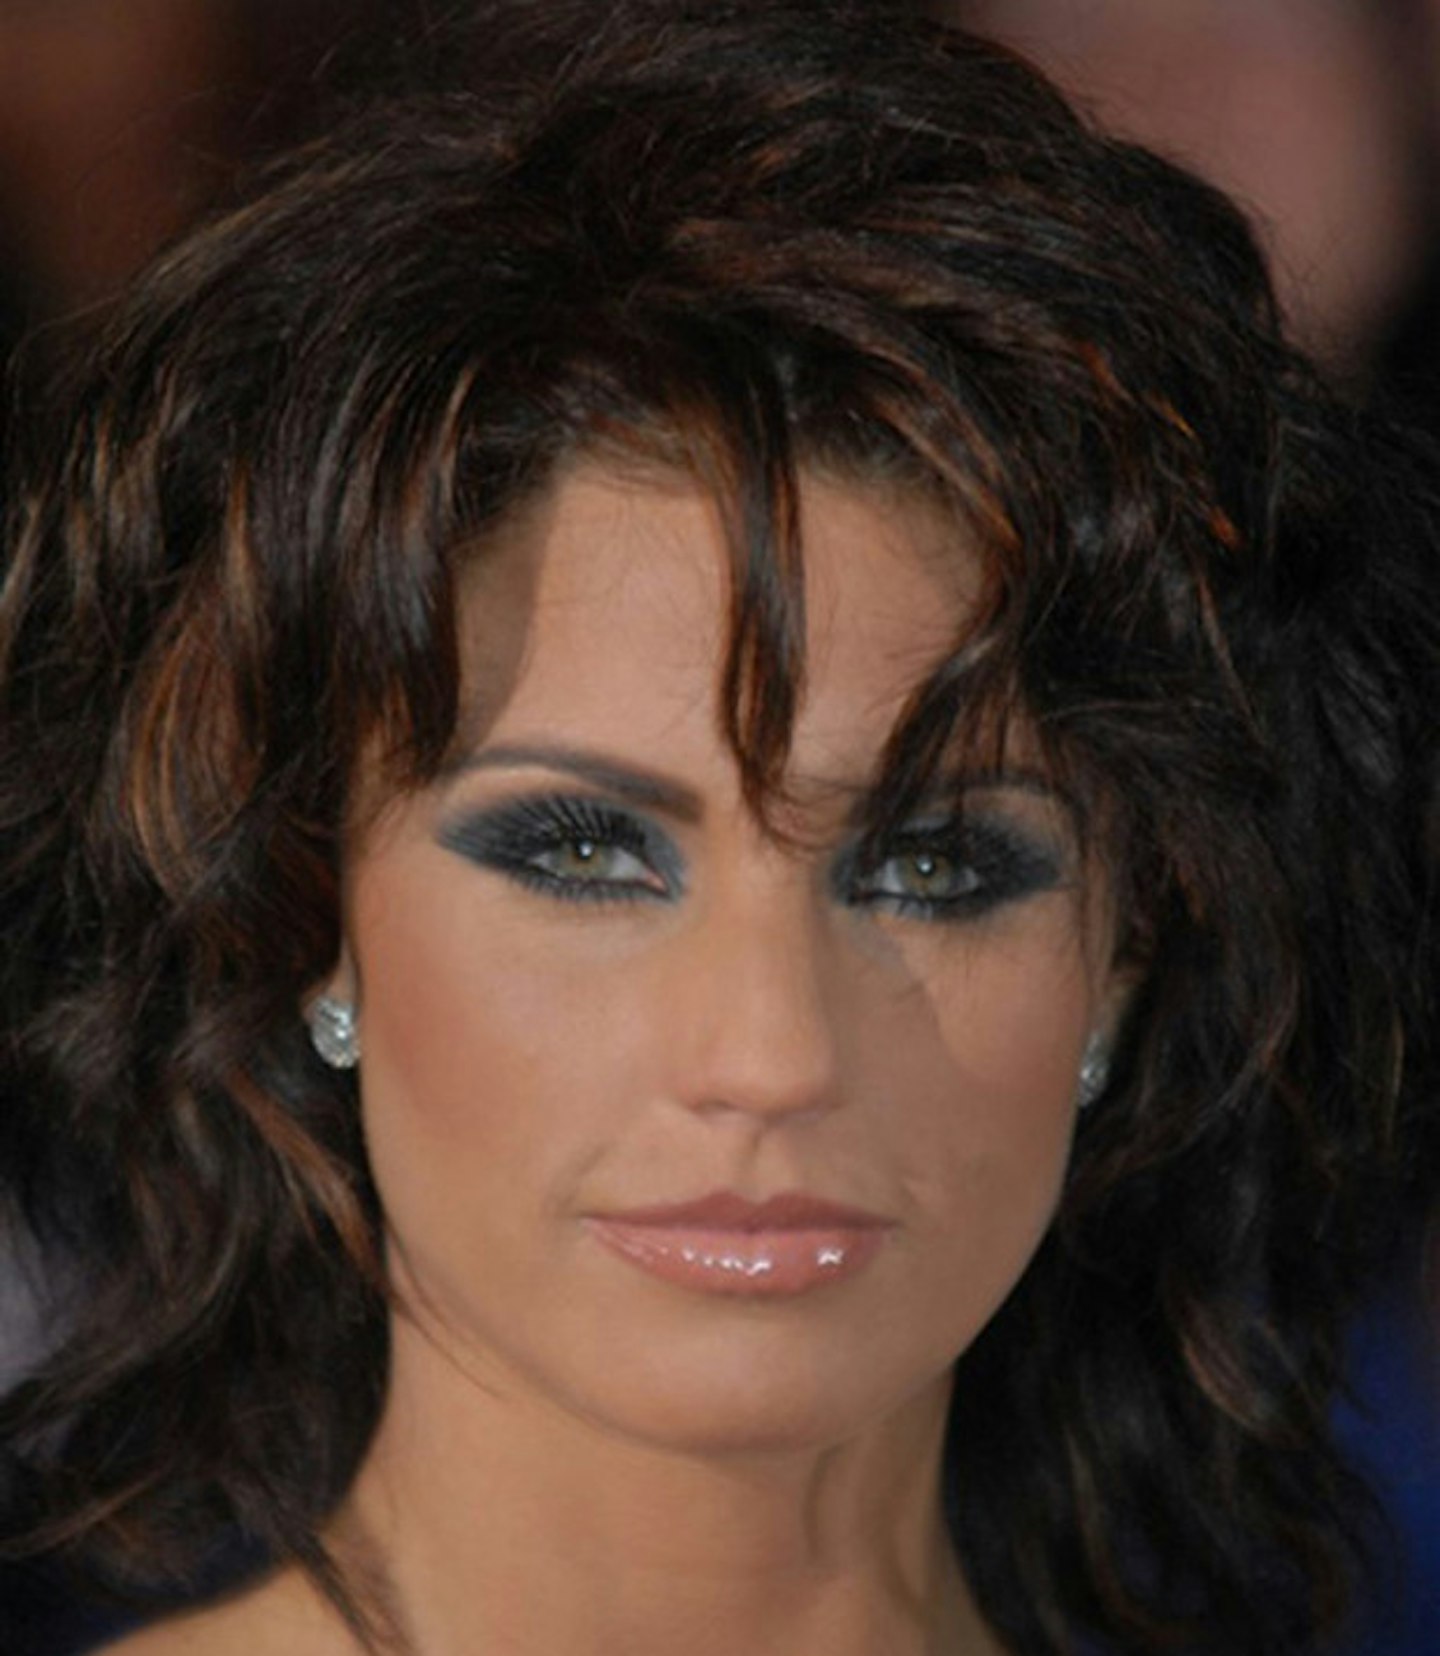 katie-price-jordan-cosmetic-plastic-surgery-before-and-after-17